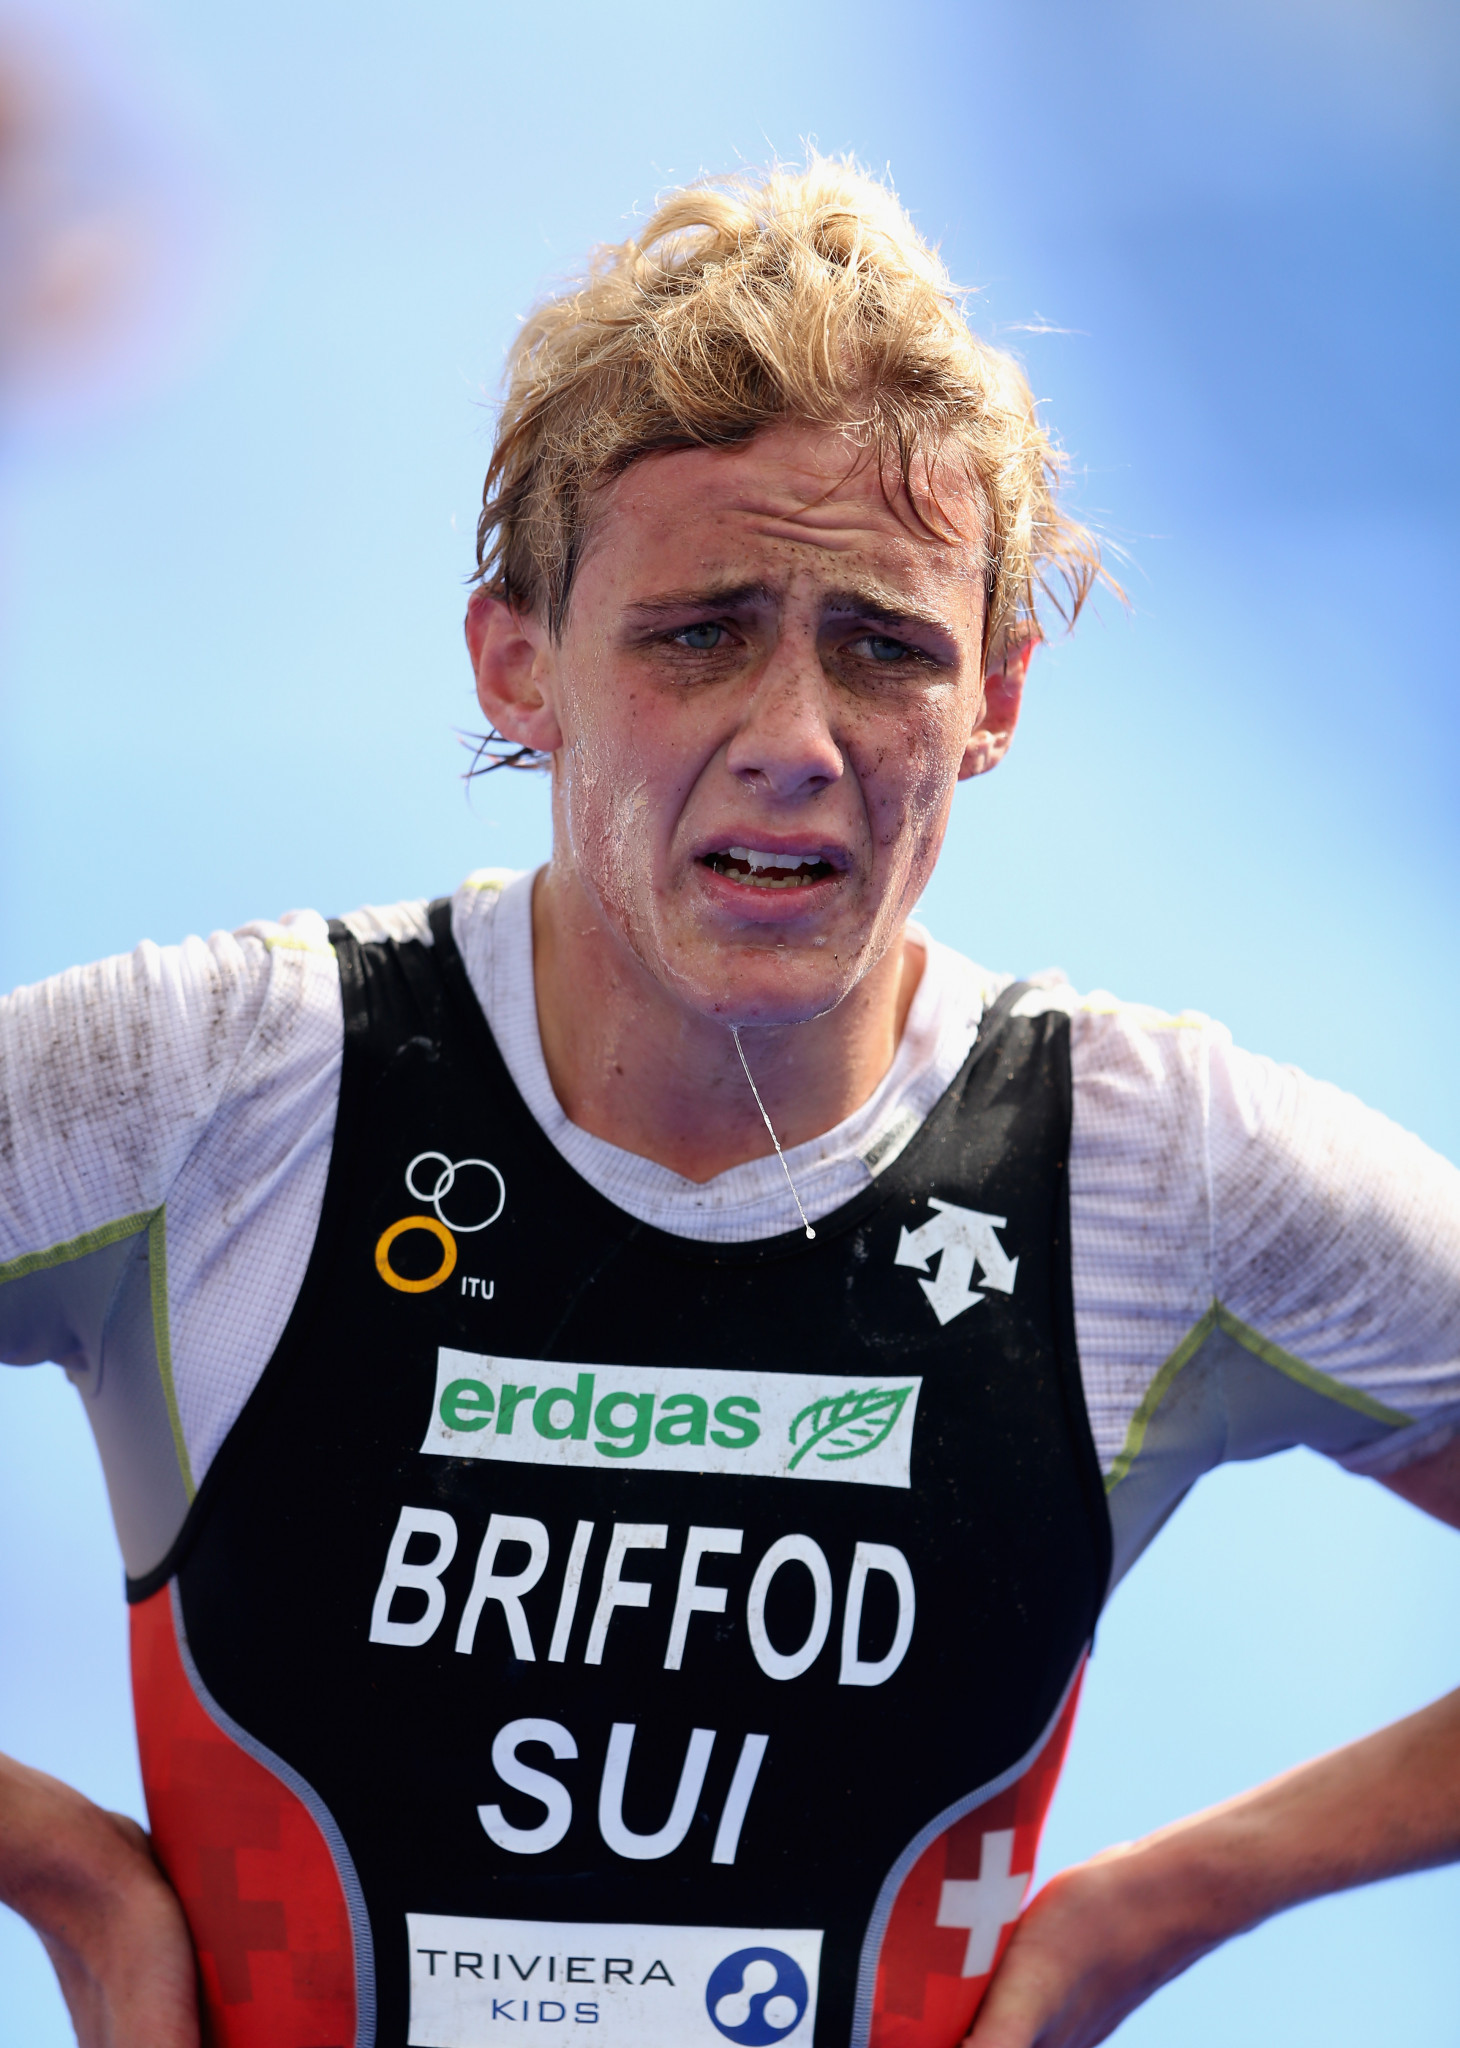 Upcoming stars and home hero Frintová set for World Triathlon Cup in Karlovy Vary